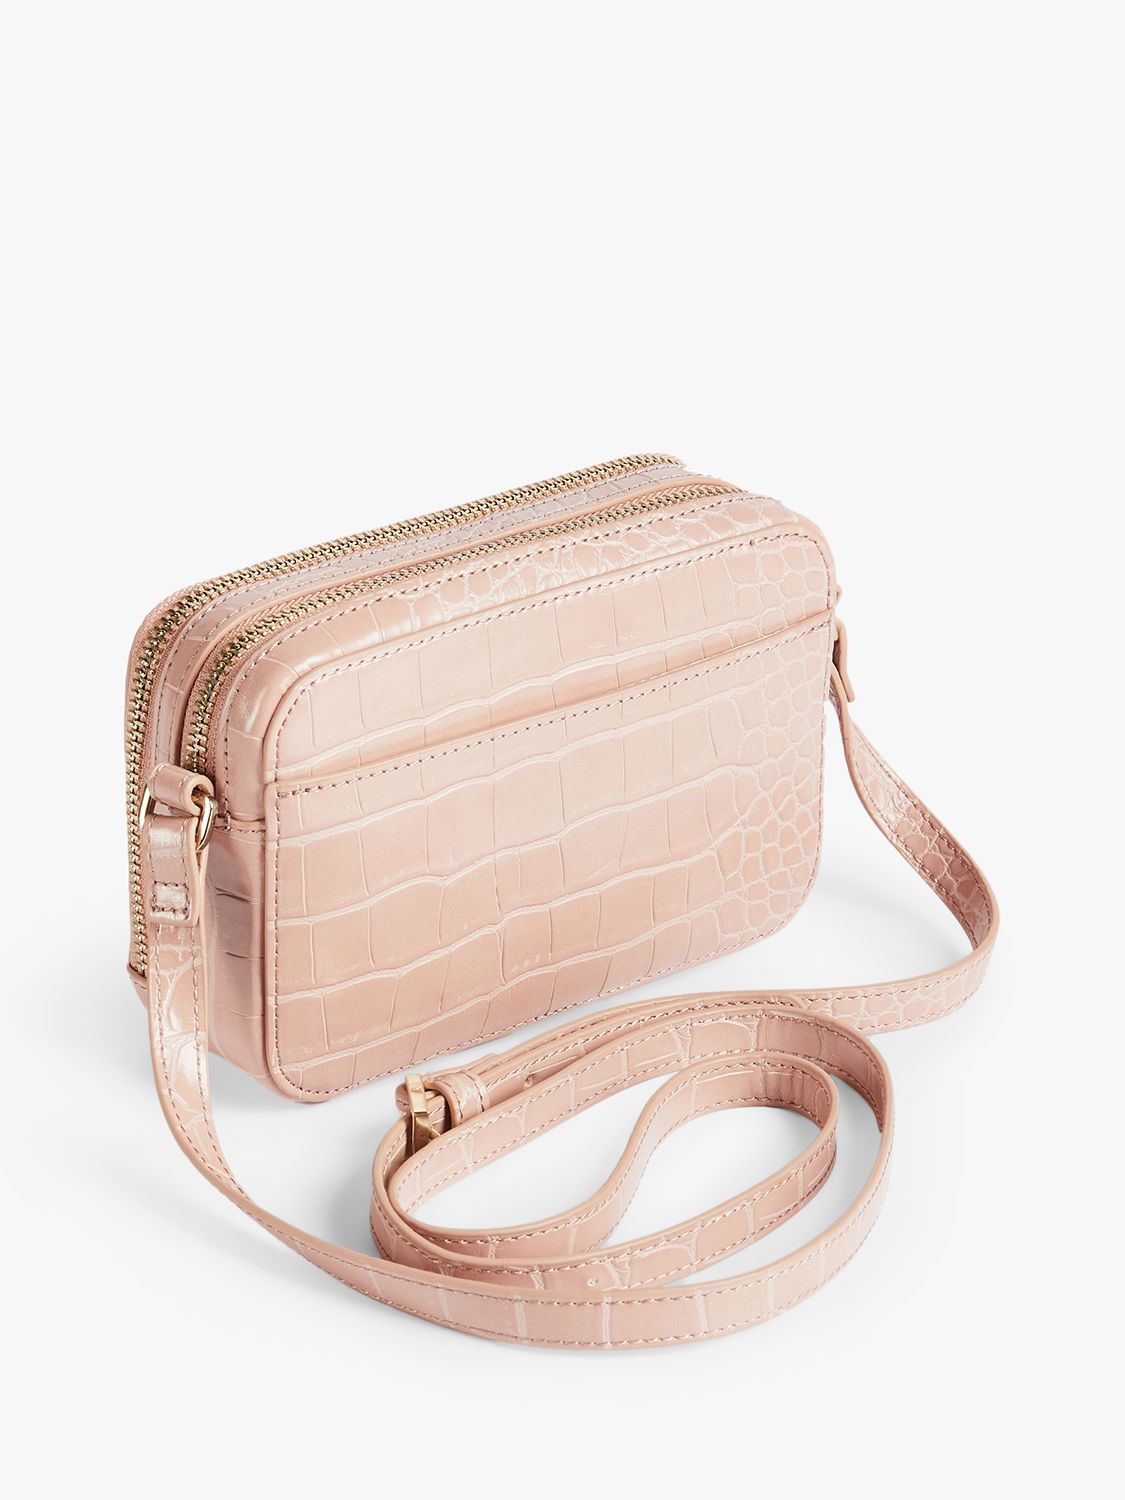 Ted Baker Stina Leather Cross Body Bag, Mid Pink at John Lewis & Partners